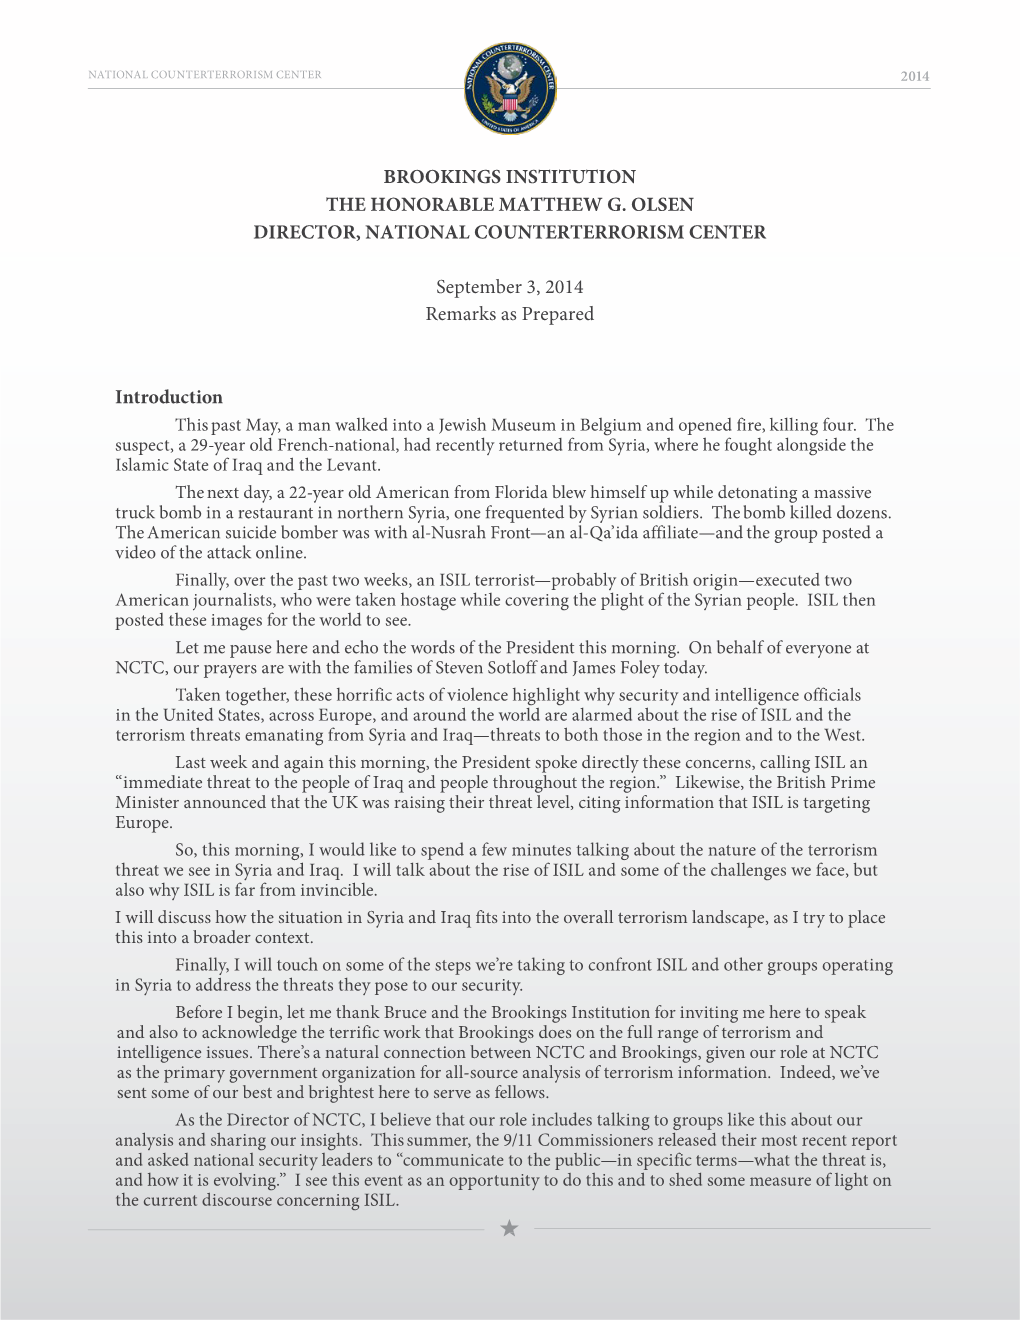 2014-09-03 Remarks for the Brookings Institution.Pdf